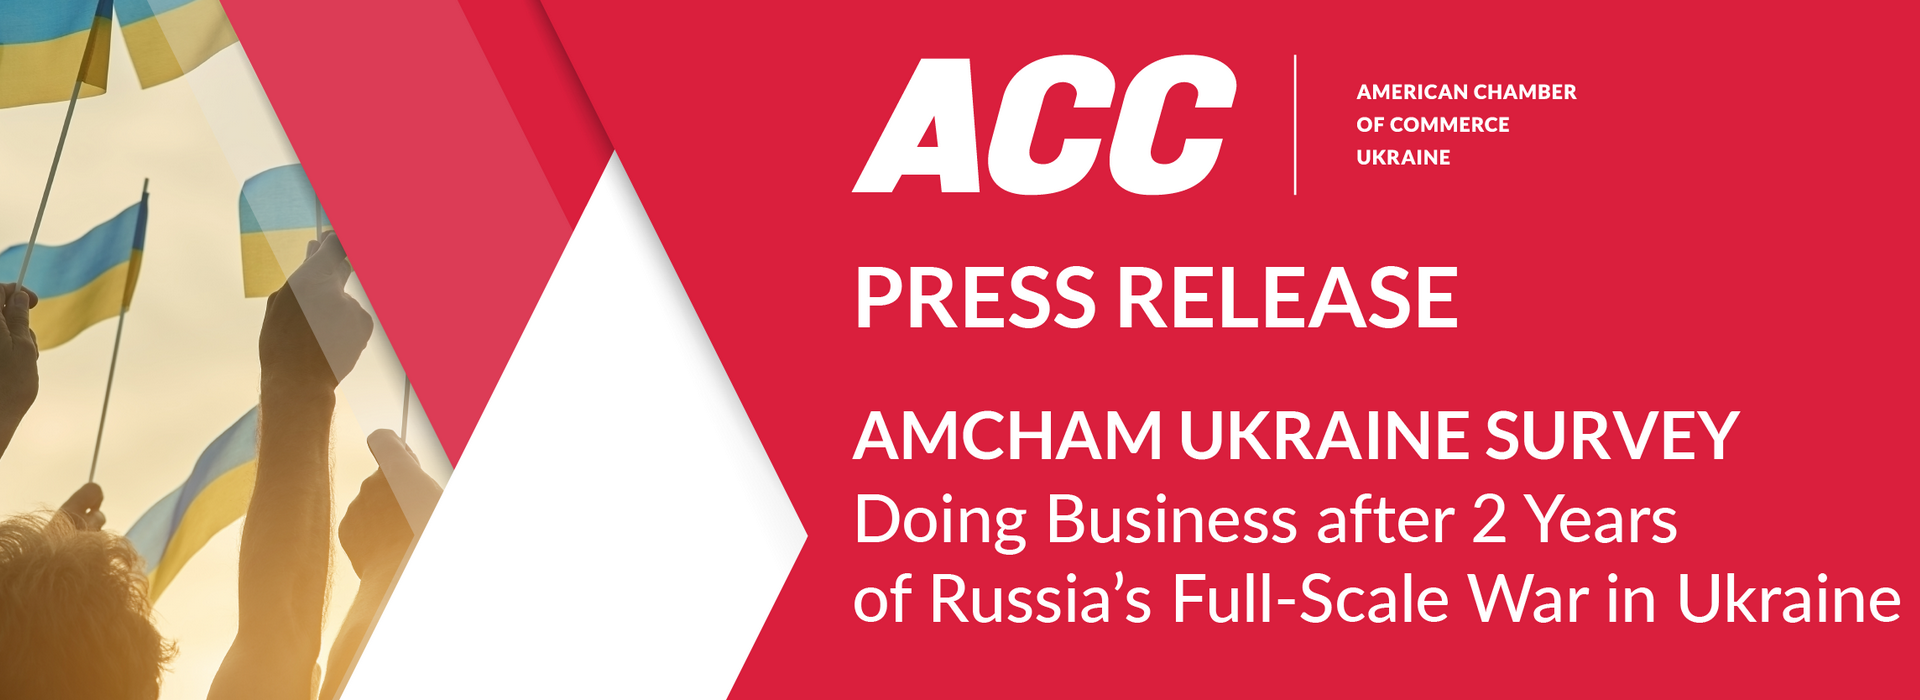 86% of companies are fully operational after 2 years of Russia’s full-scale war in Ukraine – AmCham Ukraine latest survey findings